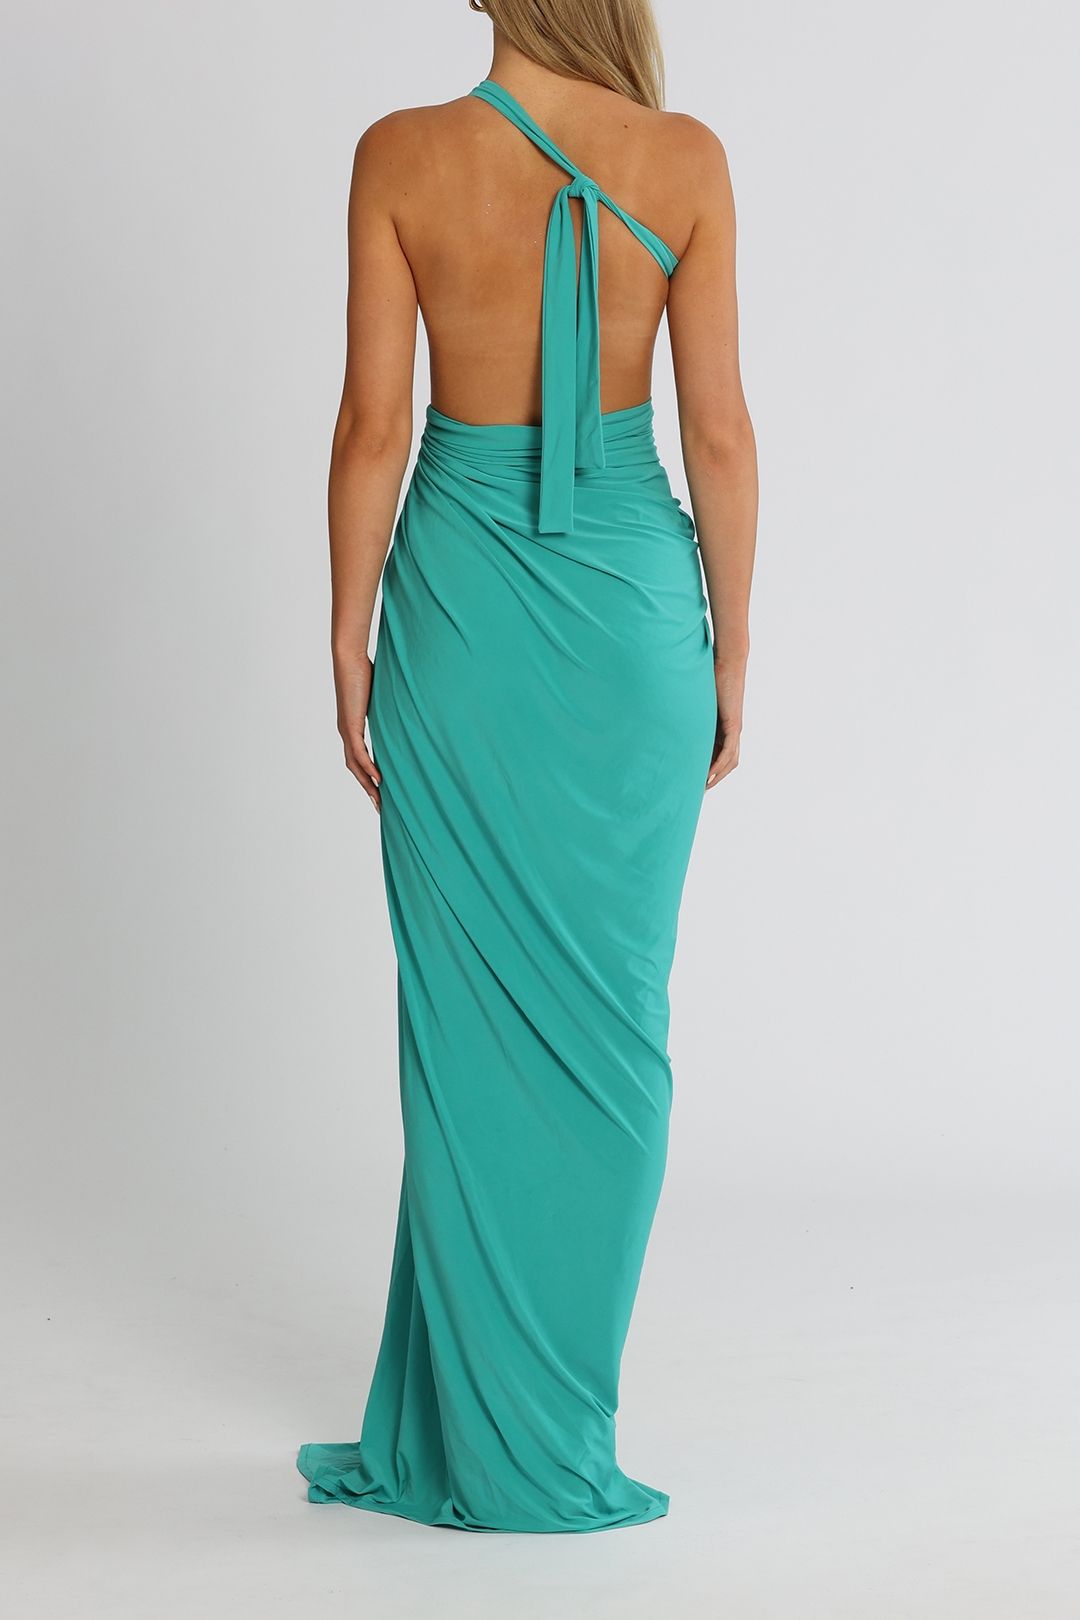 J. Angelique Disa Gown Teal Backless